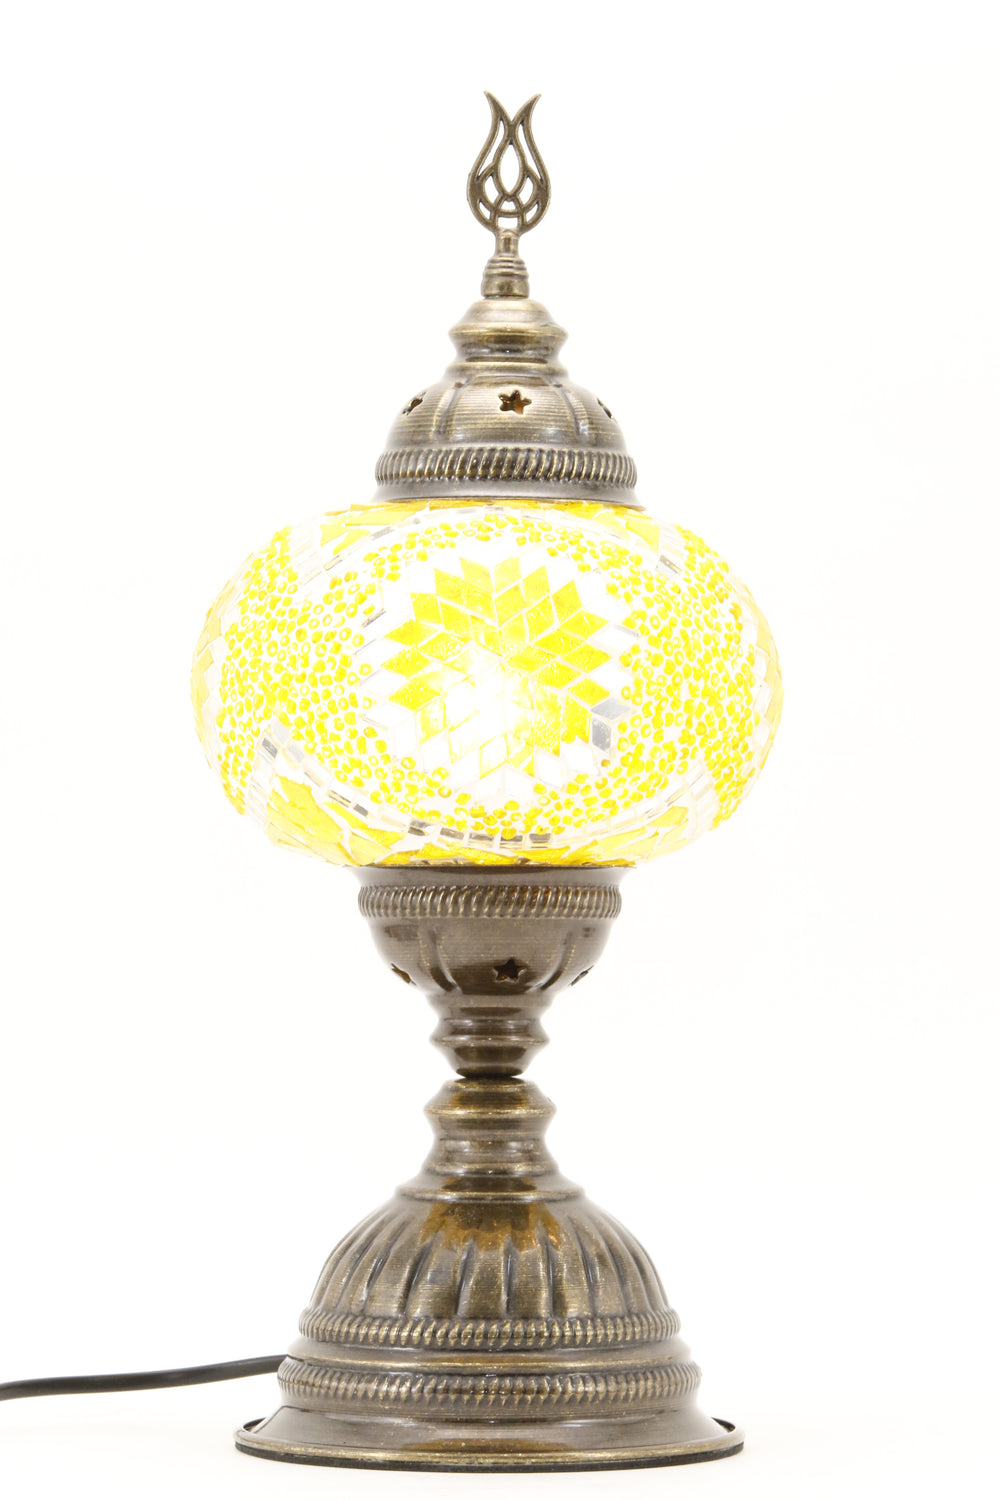 TURKISH MOSAIC TABLE LAMP MB3 YELLOW-TURNED ON